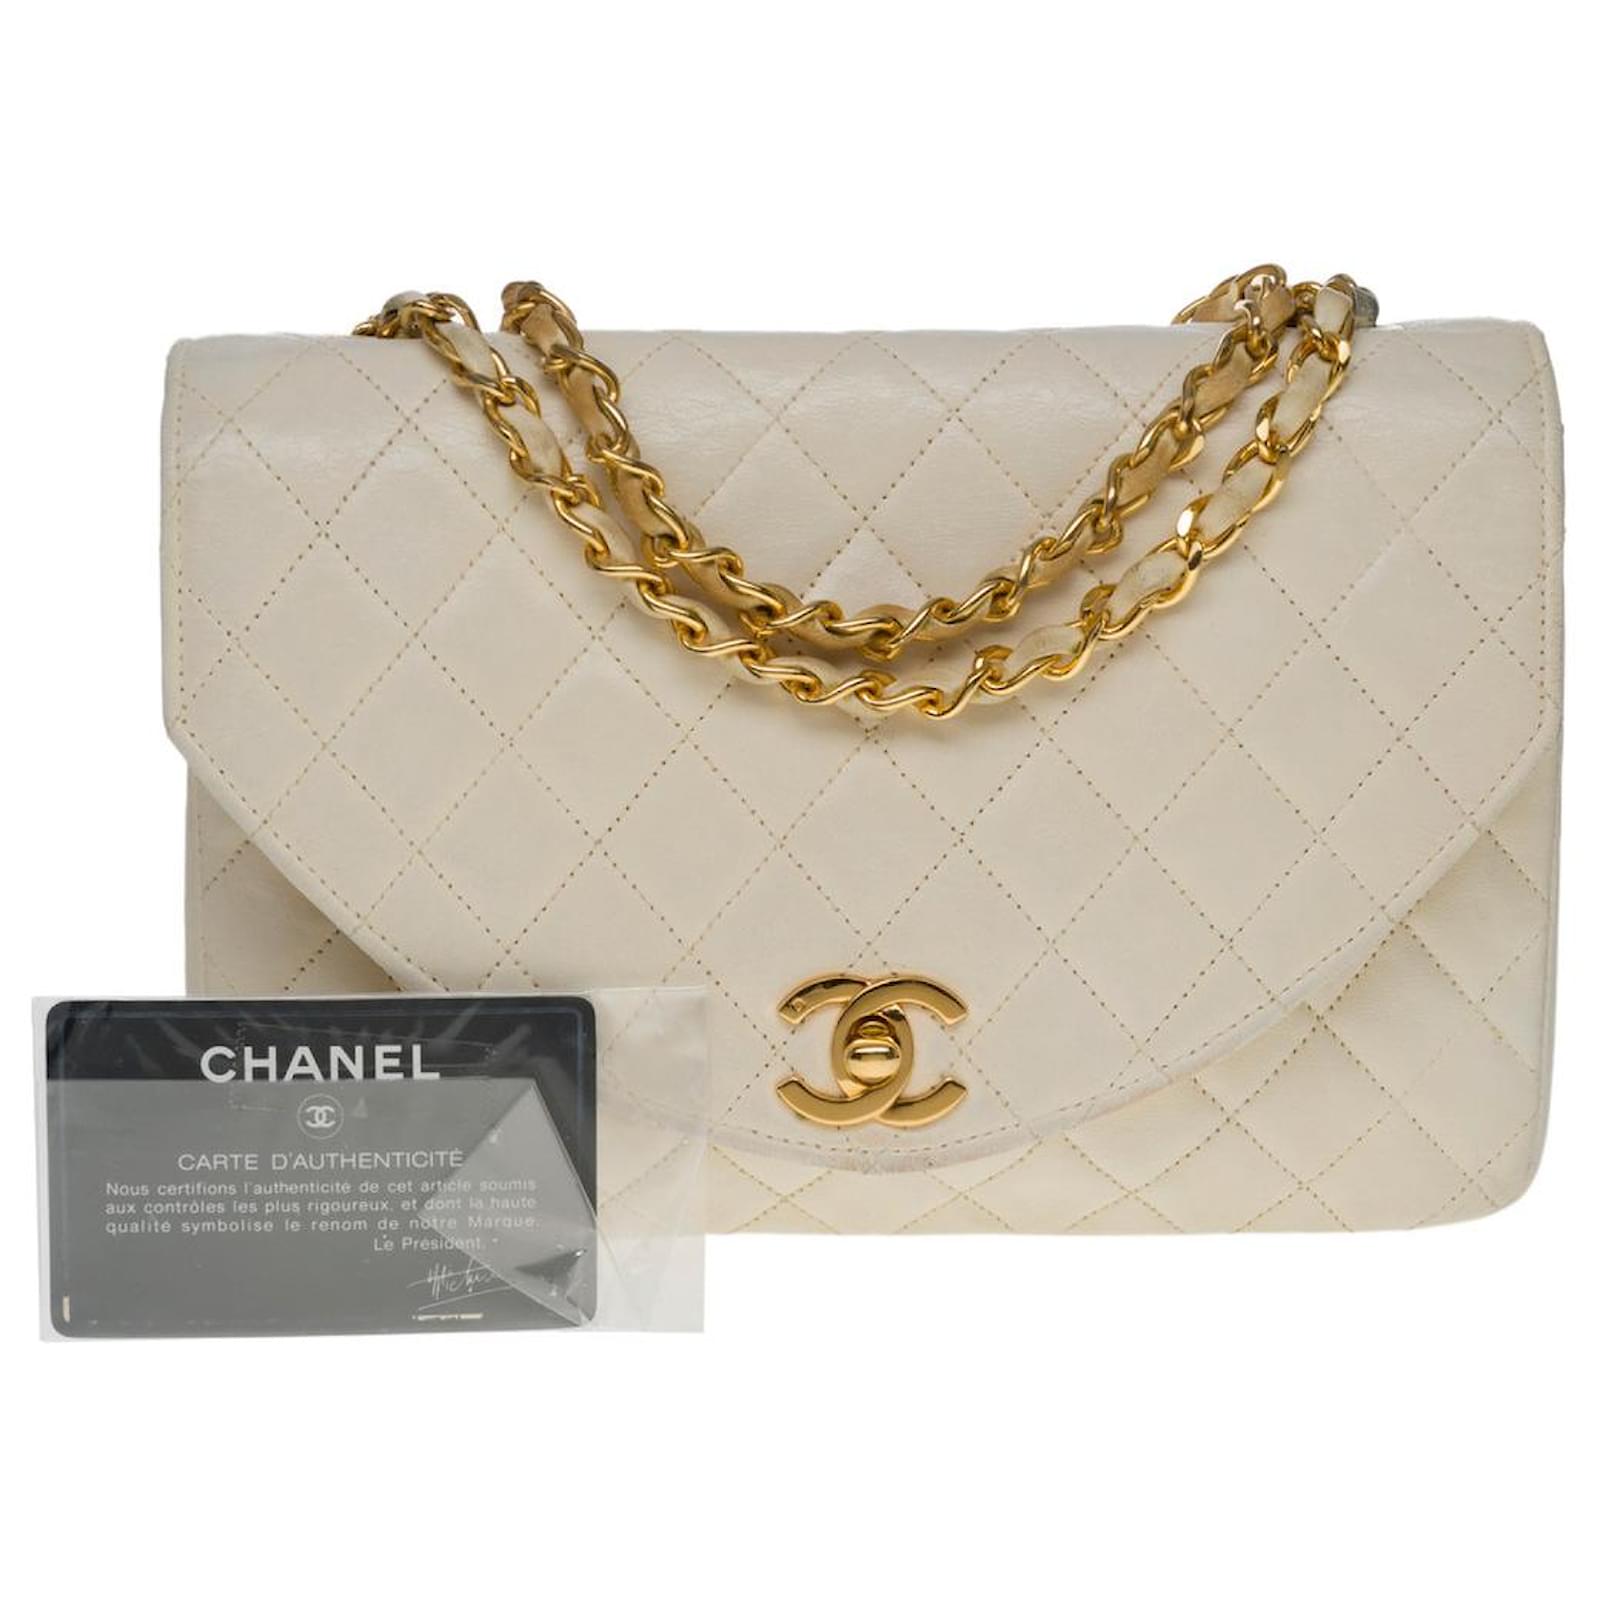 Timeless CHANEL CLASSIC FLAP BAG CROSSBODY BAG IN ECRU QUILTED